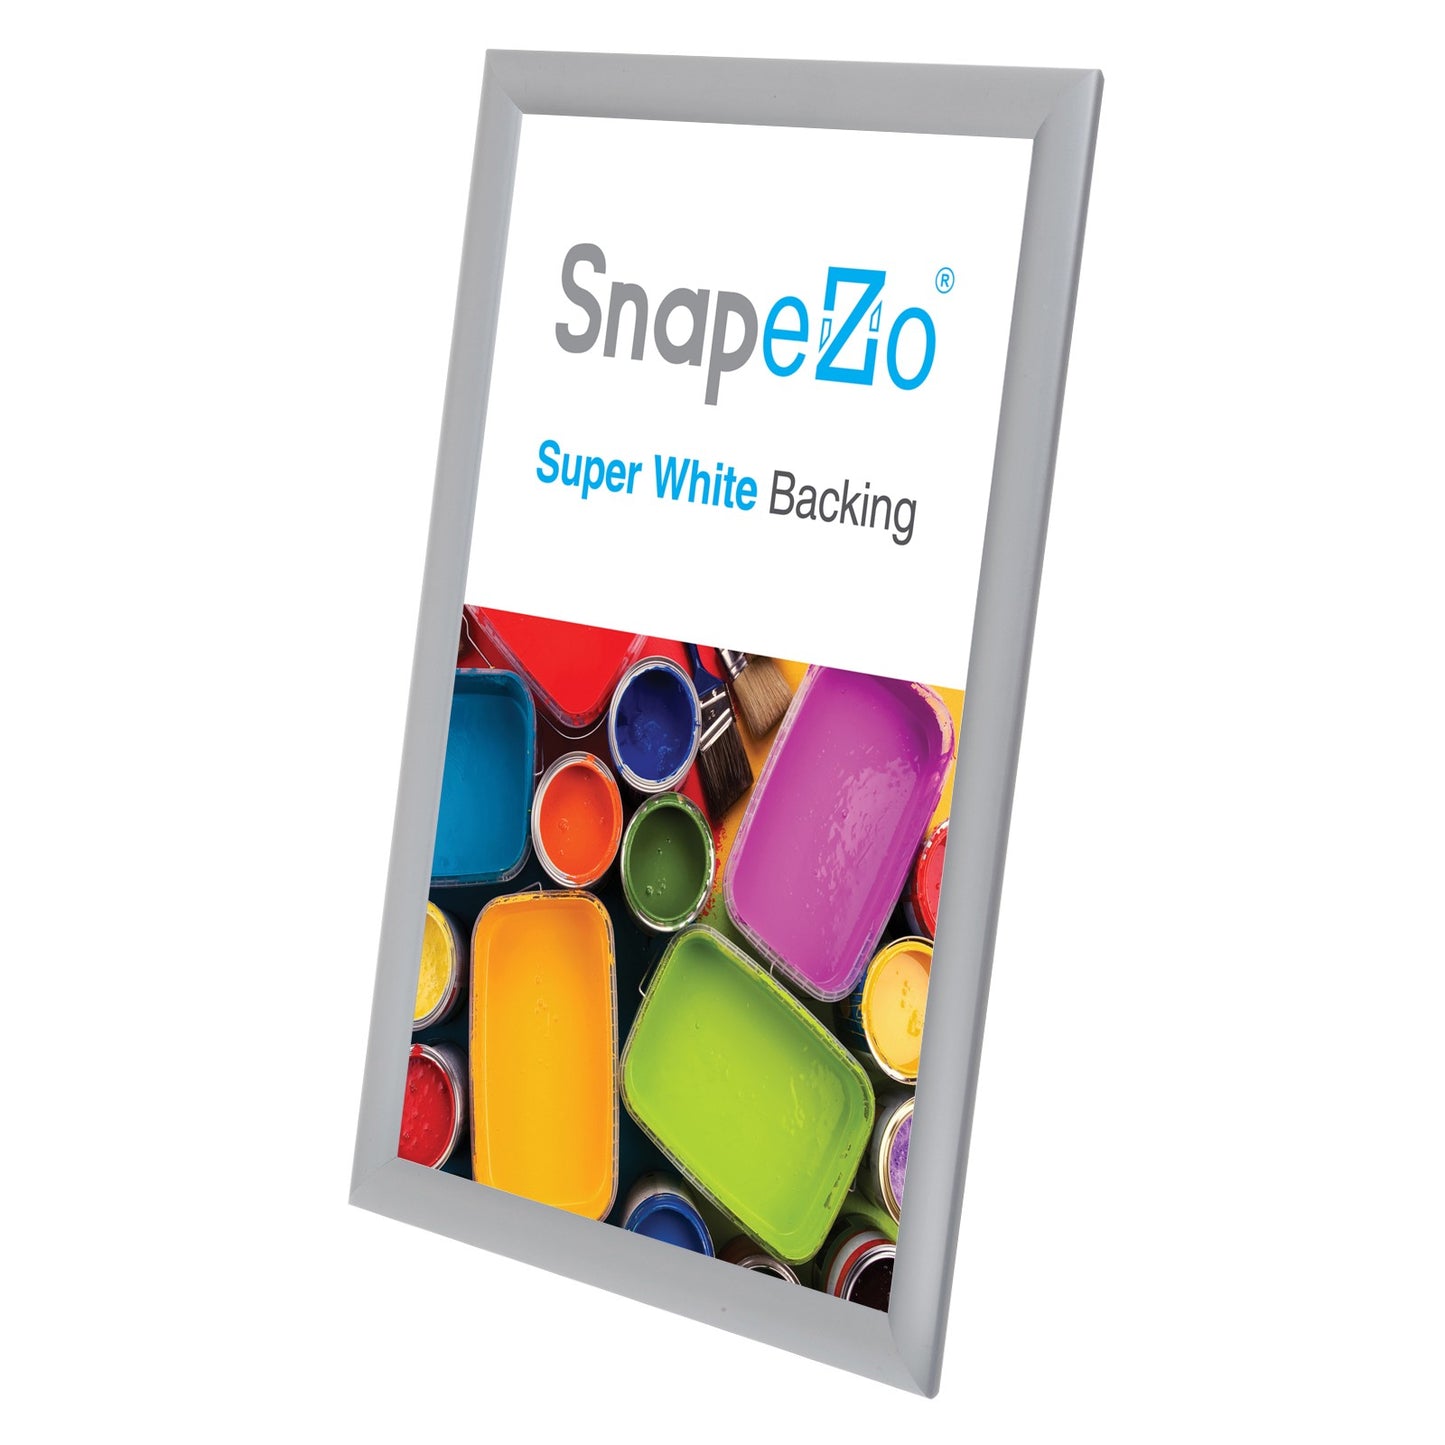 Twin-Pack of Snapezo® Silver 11x17 Diploma Frame - 1" Profile